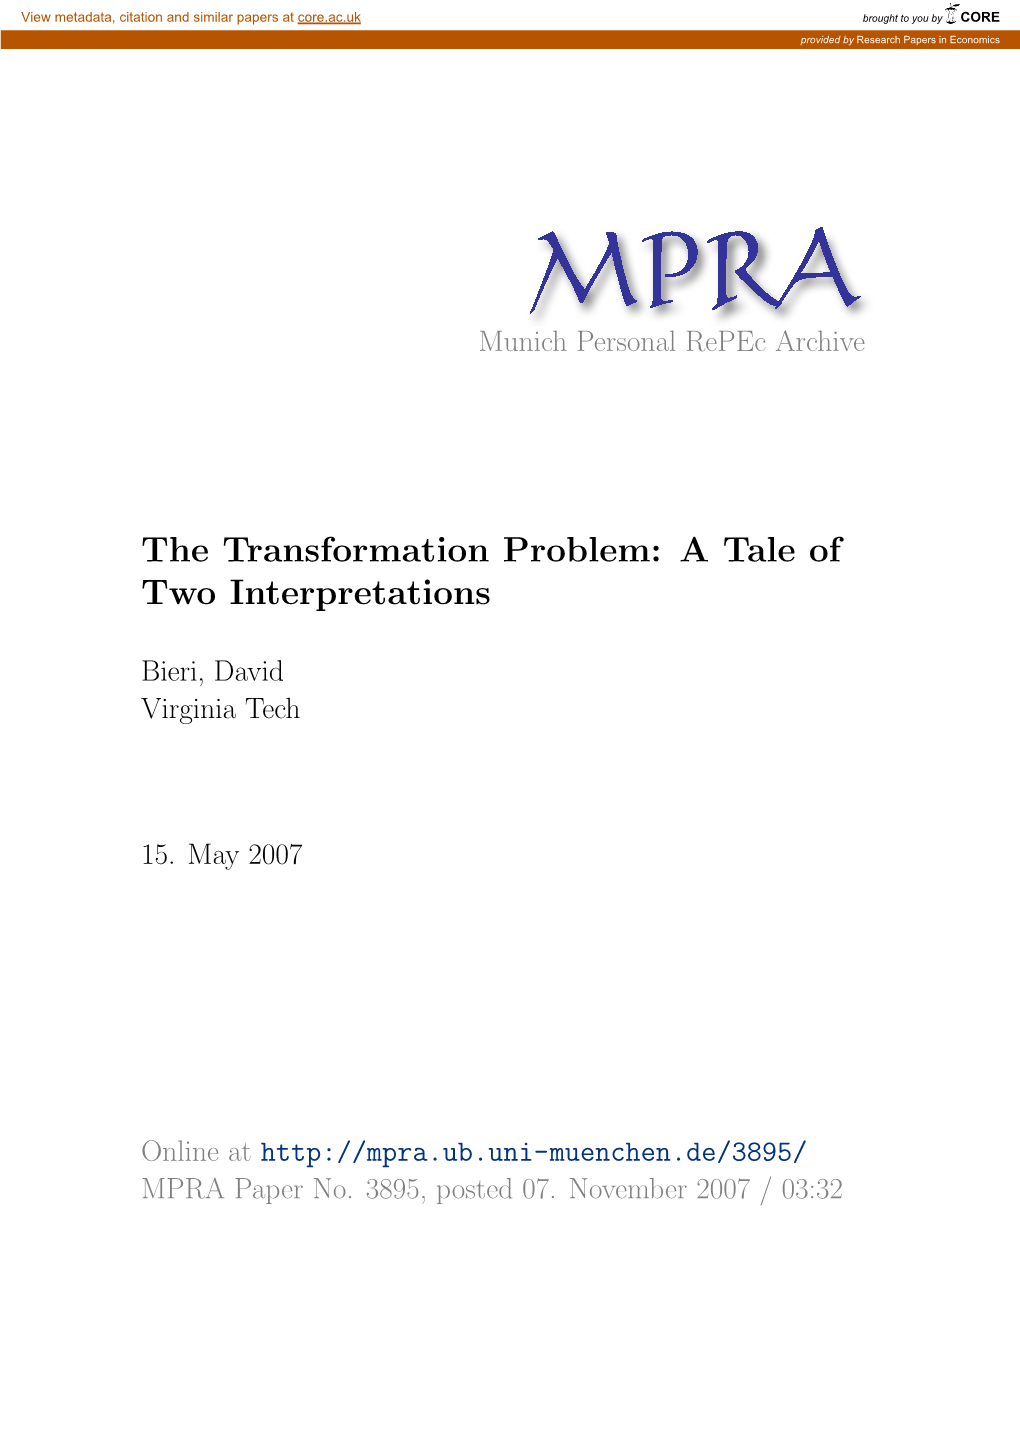 The Transformation Problem: a Tale of Two Interpretations